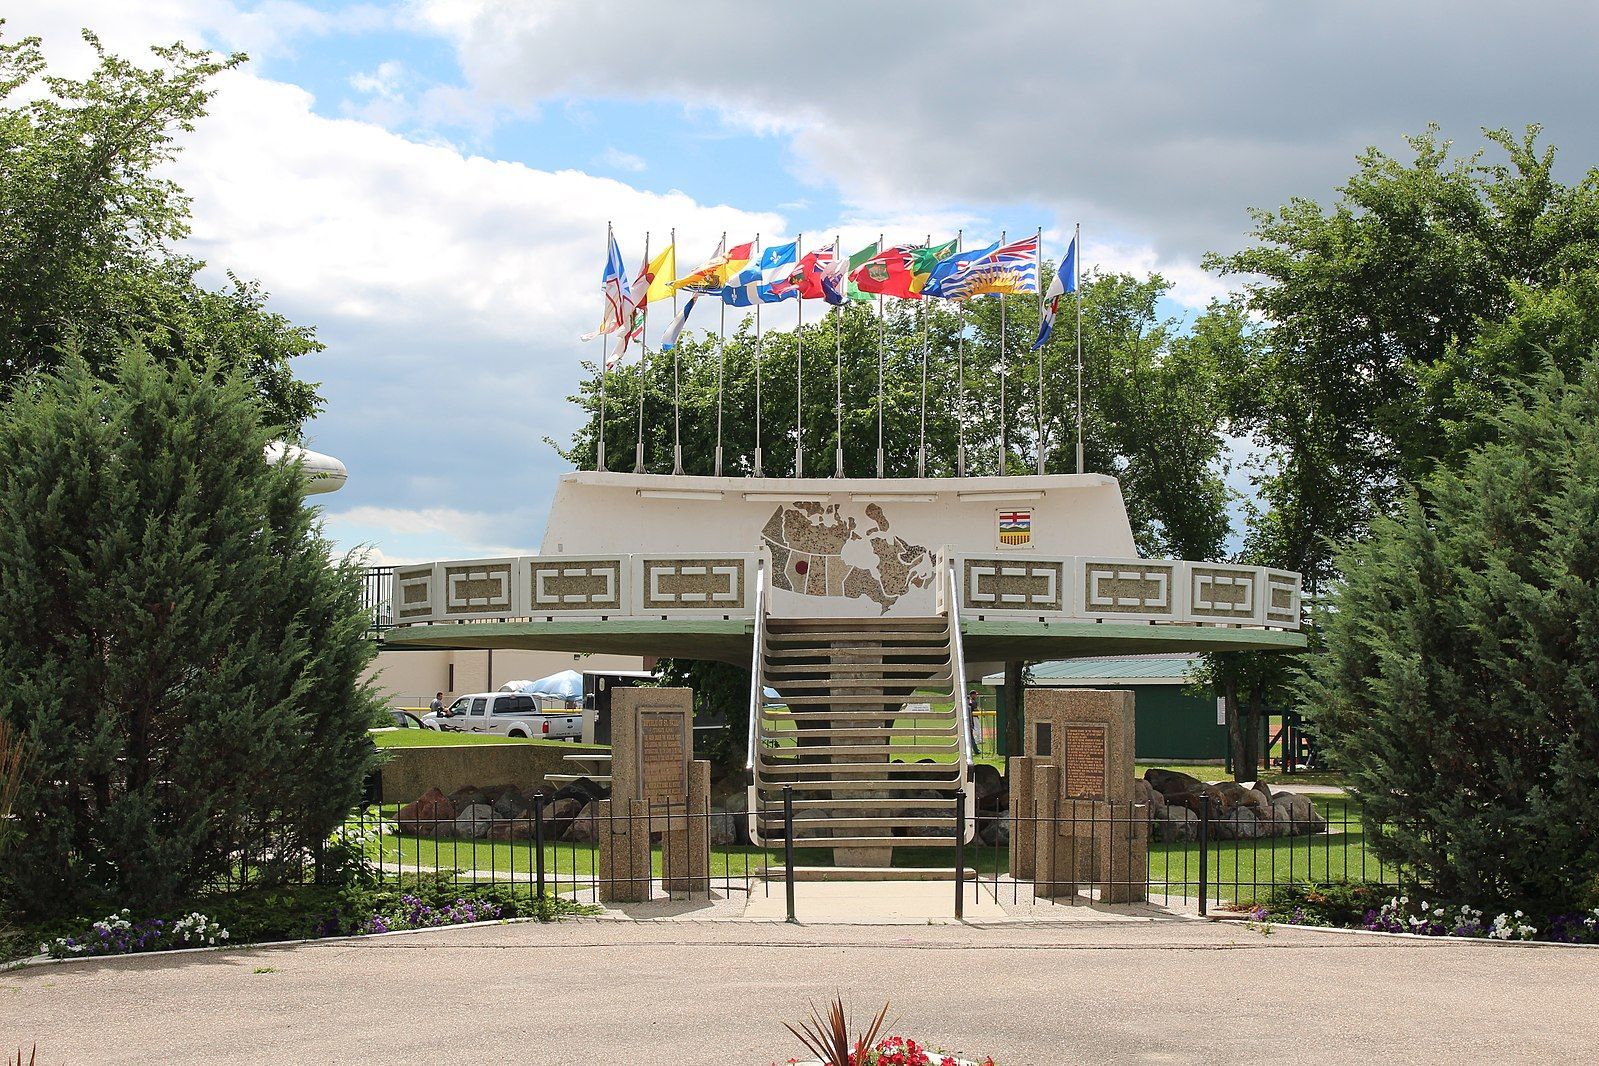 <p>Backed by the Government of Canada when it was first built in 1967, the <a href="https://www.stpaul.ca/visitors/ufo-landing-pad">UFO Landing Pad</a> sits in the town of St. Paul. While it’s become a symbol of unity and acceptance, the history behind <a href="https://www.cbc.ca/arts/for-canada-s-centennial-the-alberta-town-of-st-paul-built-a-ufo-landing-pad-but-why-1.5772557">why exactly it was built is unclear</a>. The gift shop might be more of a draw than the actual site itself, offering items from local artisans. Once you’ve grabbed a souvenir and a selfie, perhaps checking out the town’s museum across the way might make this experience more than just a roadside stop.</p>